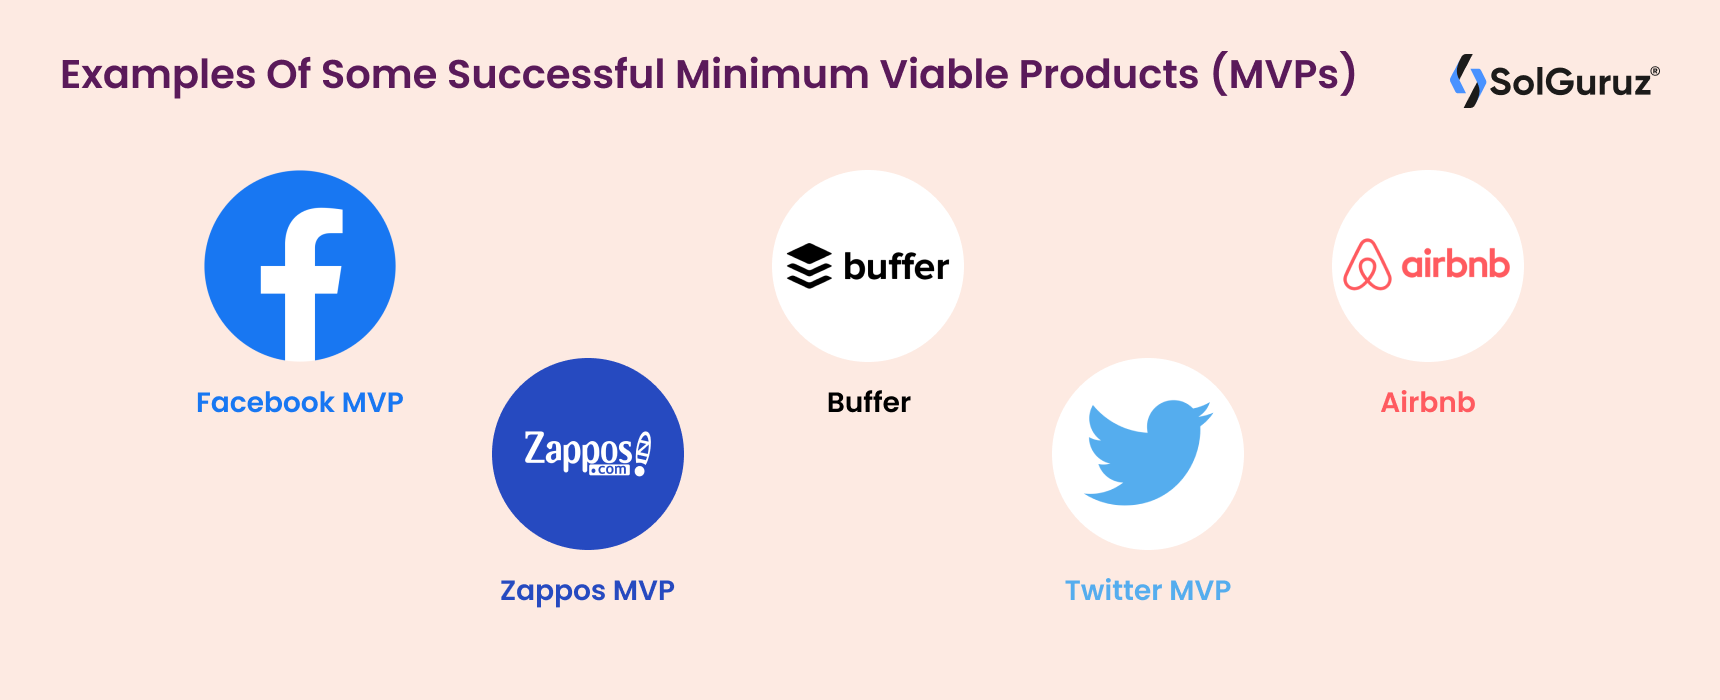 Examples Of Some Successful Minimum Viable Products (MVPs)